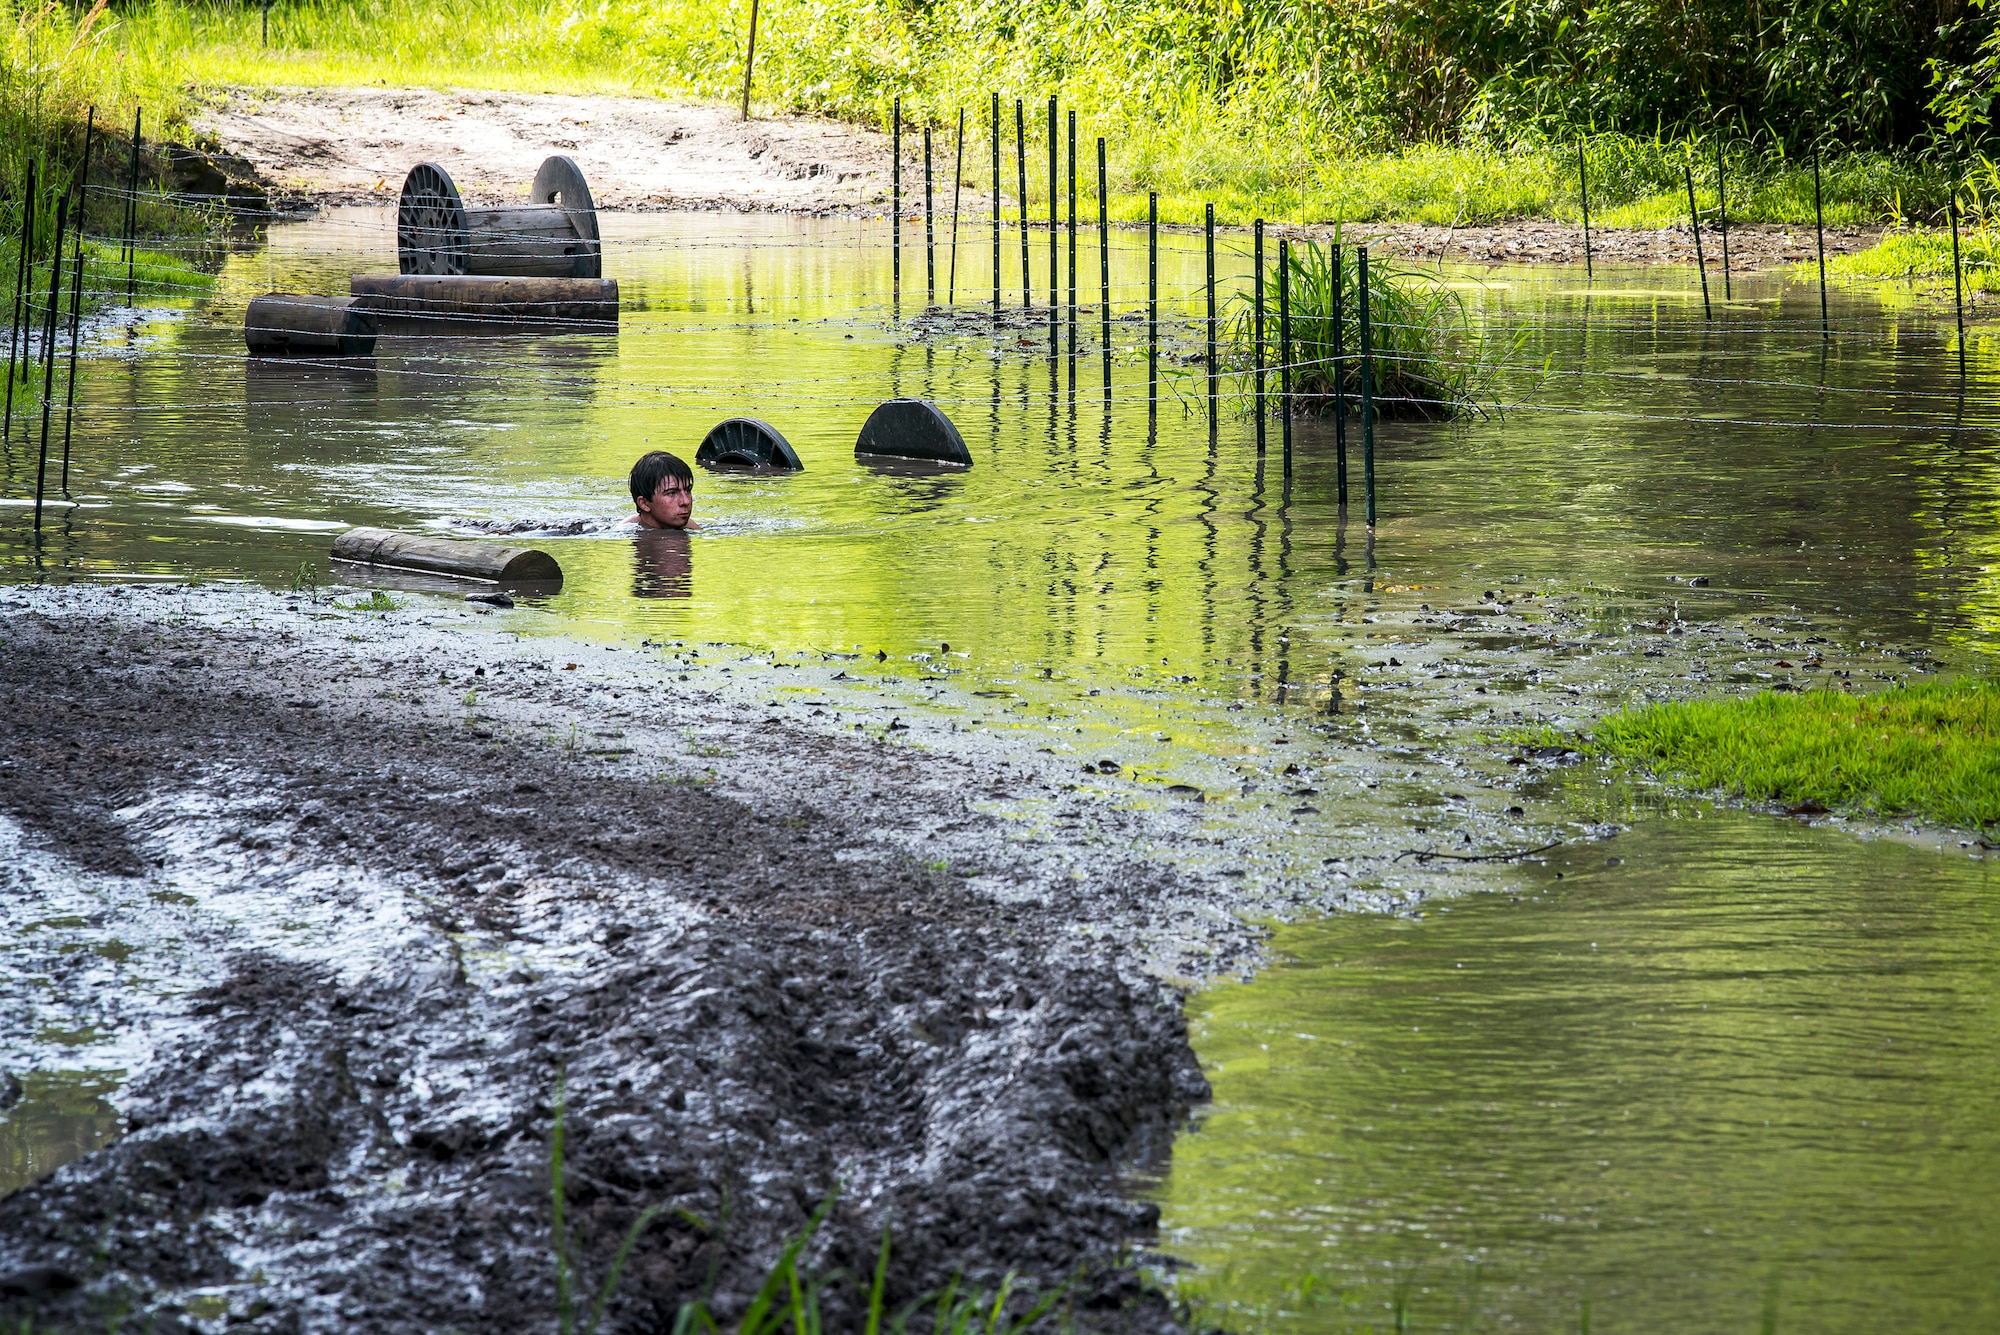 A Moody Mud Run participant, swims through an obstacle, May 4, 2019, in Ray City, Ga. The sixth annual Mud Run had approximately 850 participants who had to overcome a series of obstacles on the 4 and 5-mile courses. The 32-obstacle course gave Airmen, families and the local community an opportunity to build camaraderie and teamwork skills. (U.S. Air Force photo by Airman 1st Class Eugene Oliver)